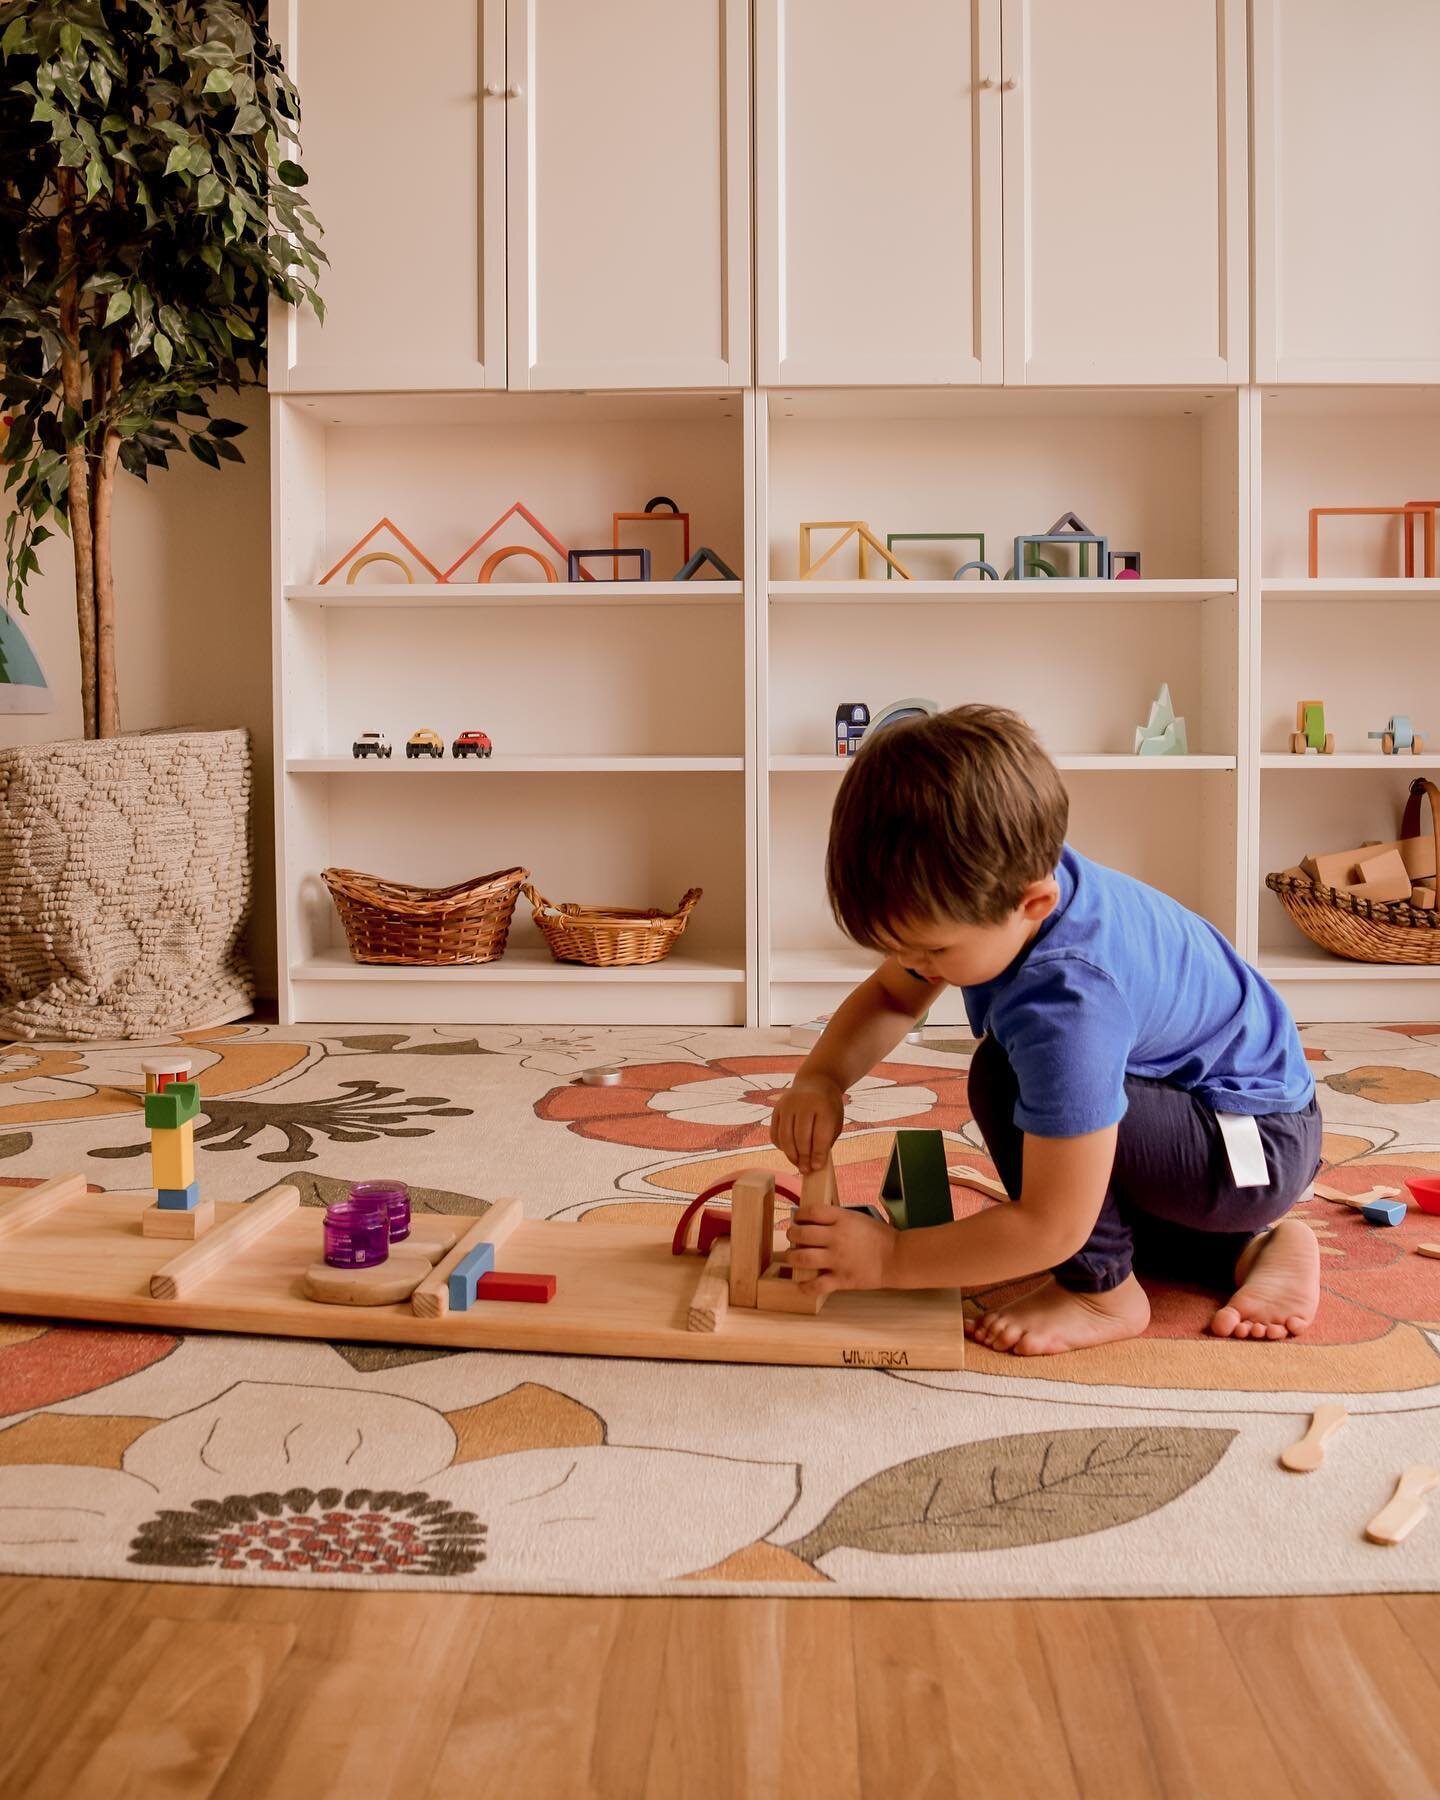 Young children (ages 0-6) need 5-8 hours of unstructured play *per day* for optimal whole child development - including physical, social, emotional, cognitive, executive function, and sensory processing

Independent play isn&rsquo;t for *us* - it&rsq